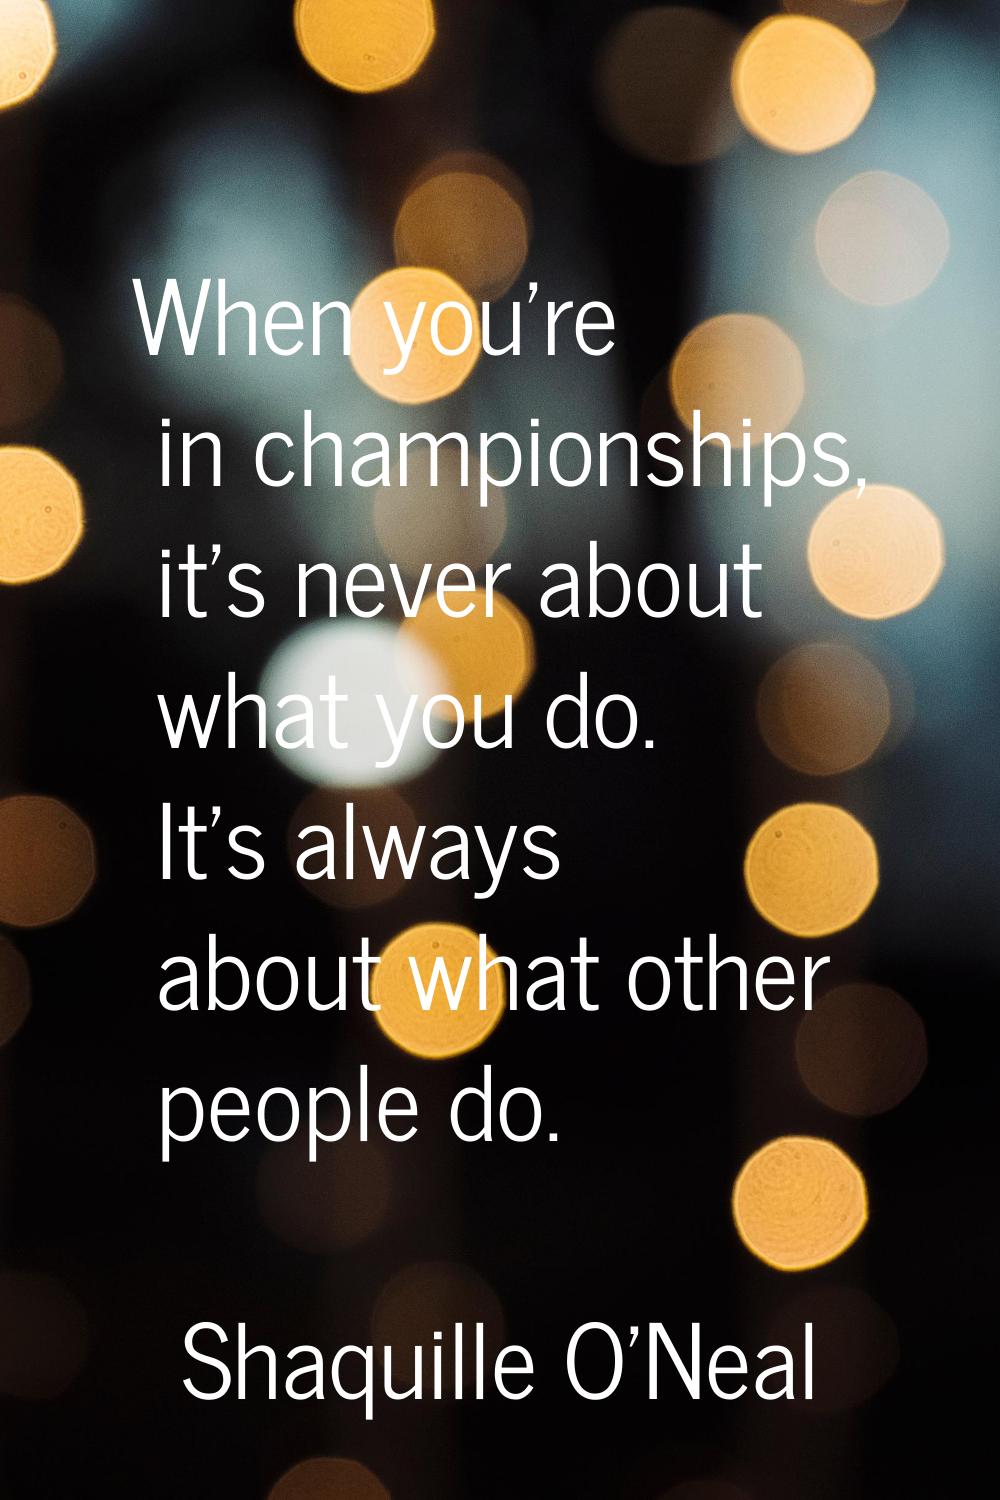 When you're in championships, it's never about what you do. It's always about what other people do.